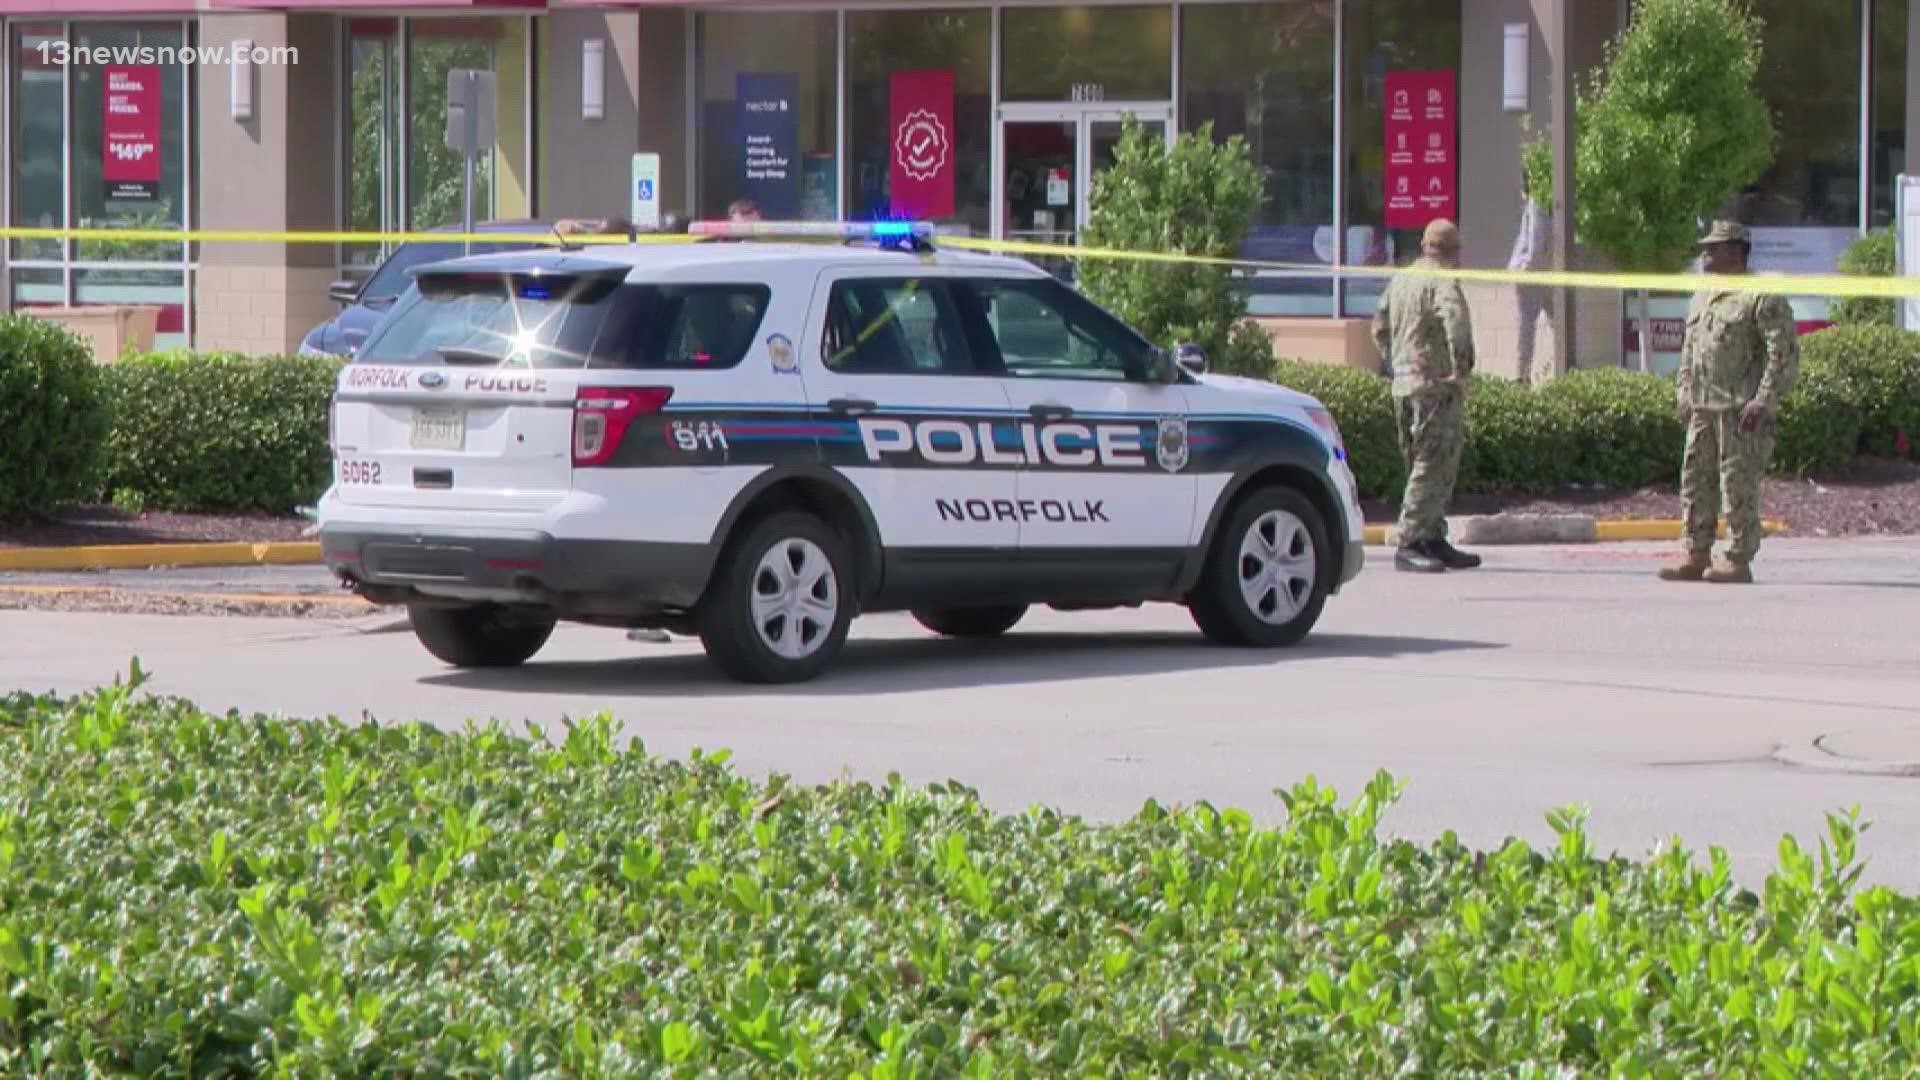 People in Norfolk are in shock after seven people got shot hours apart. Four of them died.